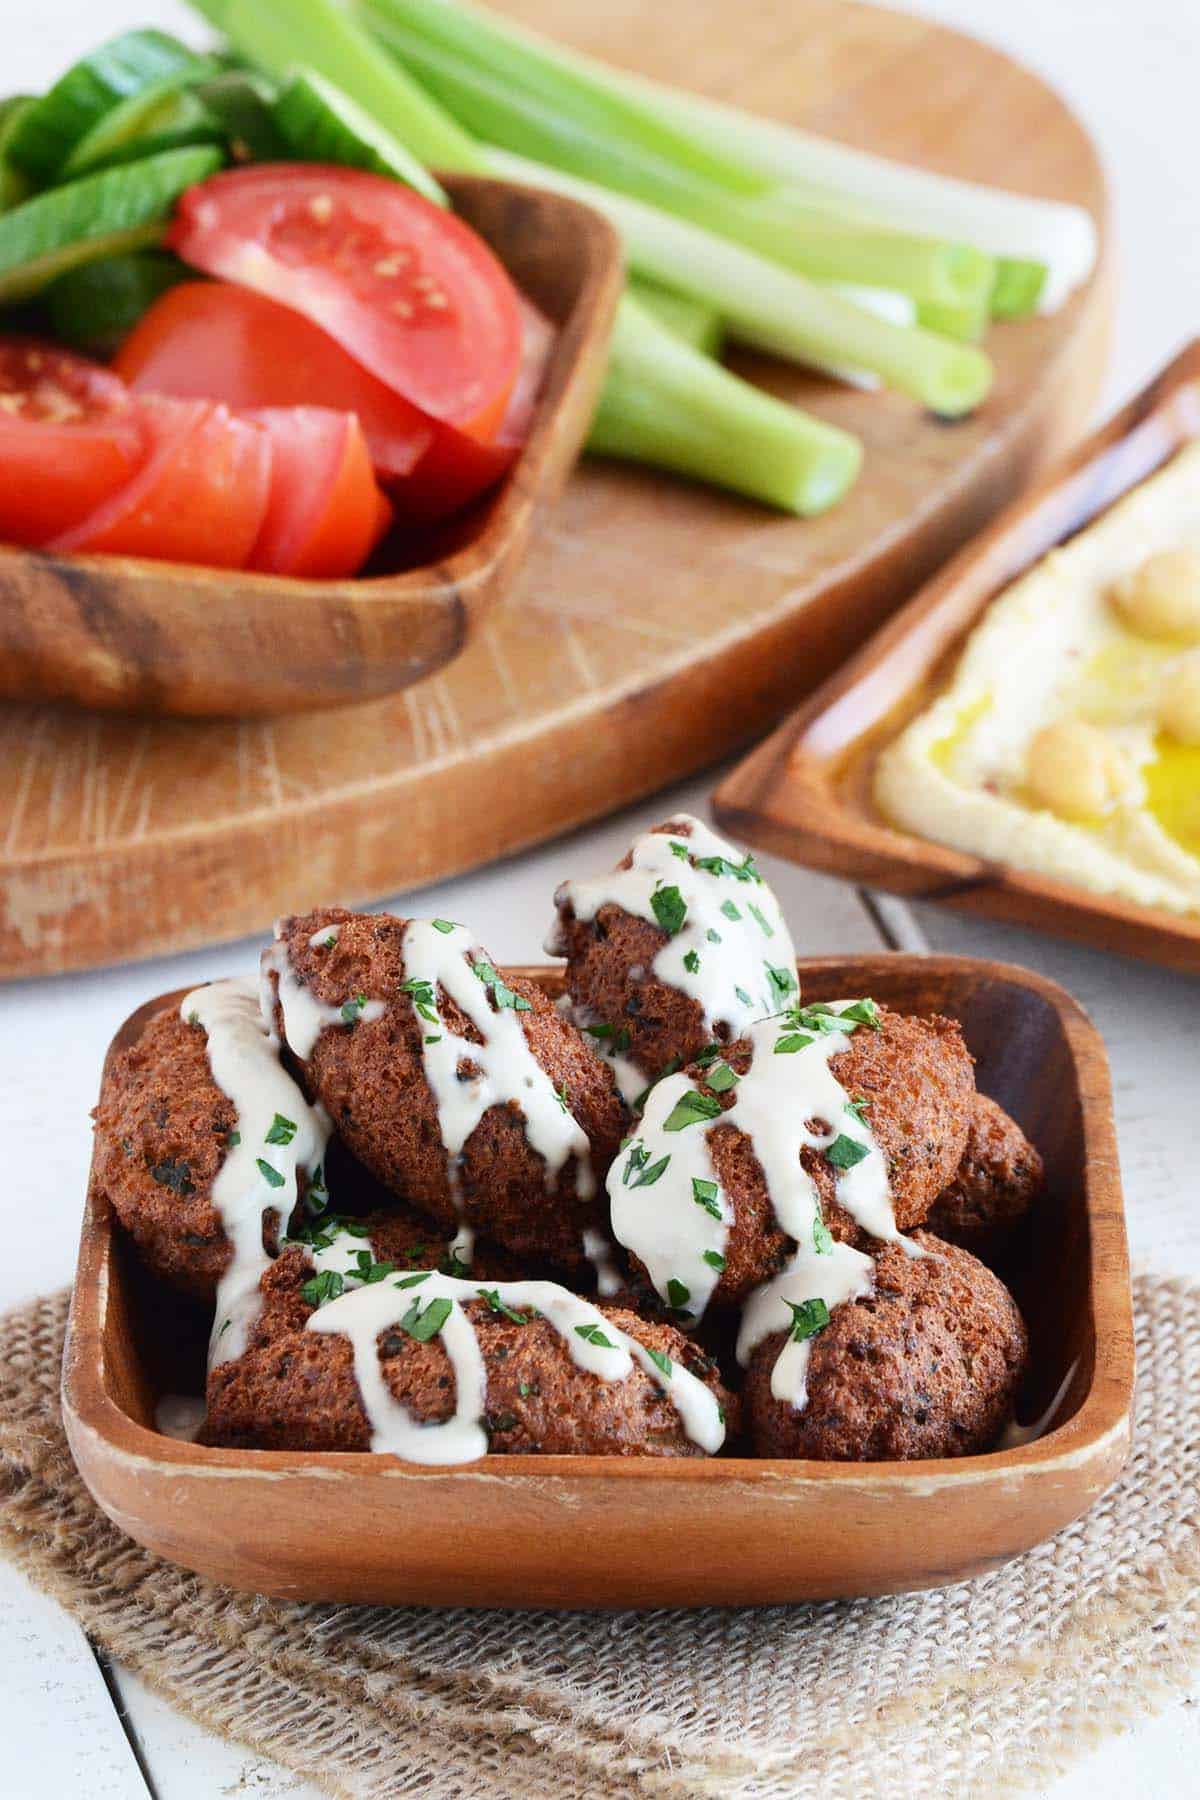 falafel fritters topped with tahini sauce in wooden dish from an edible mosaic cookbook